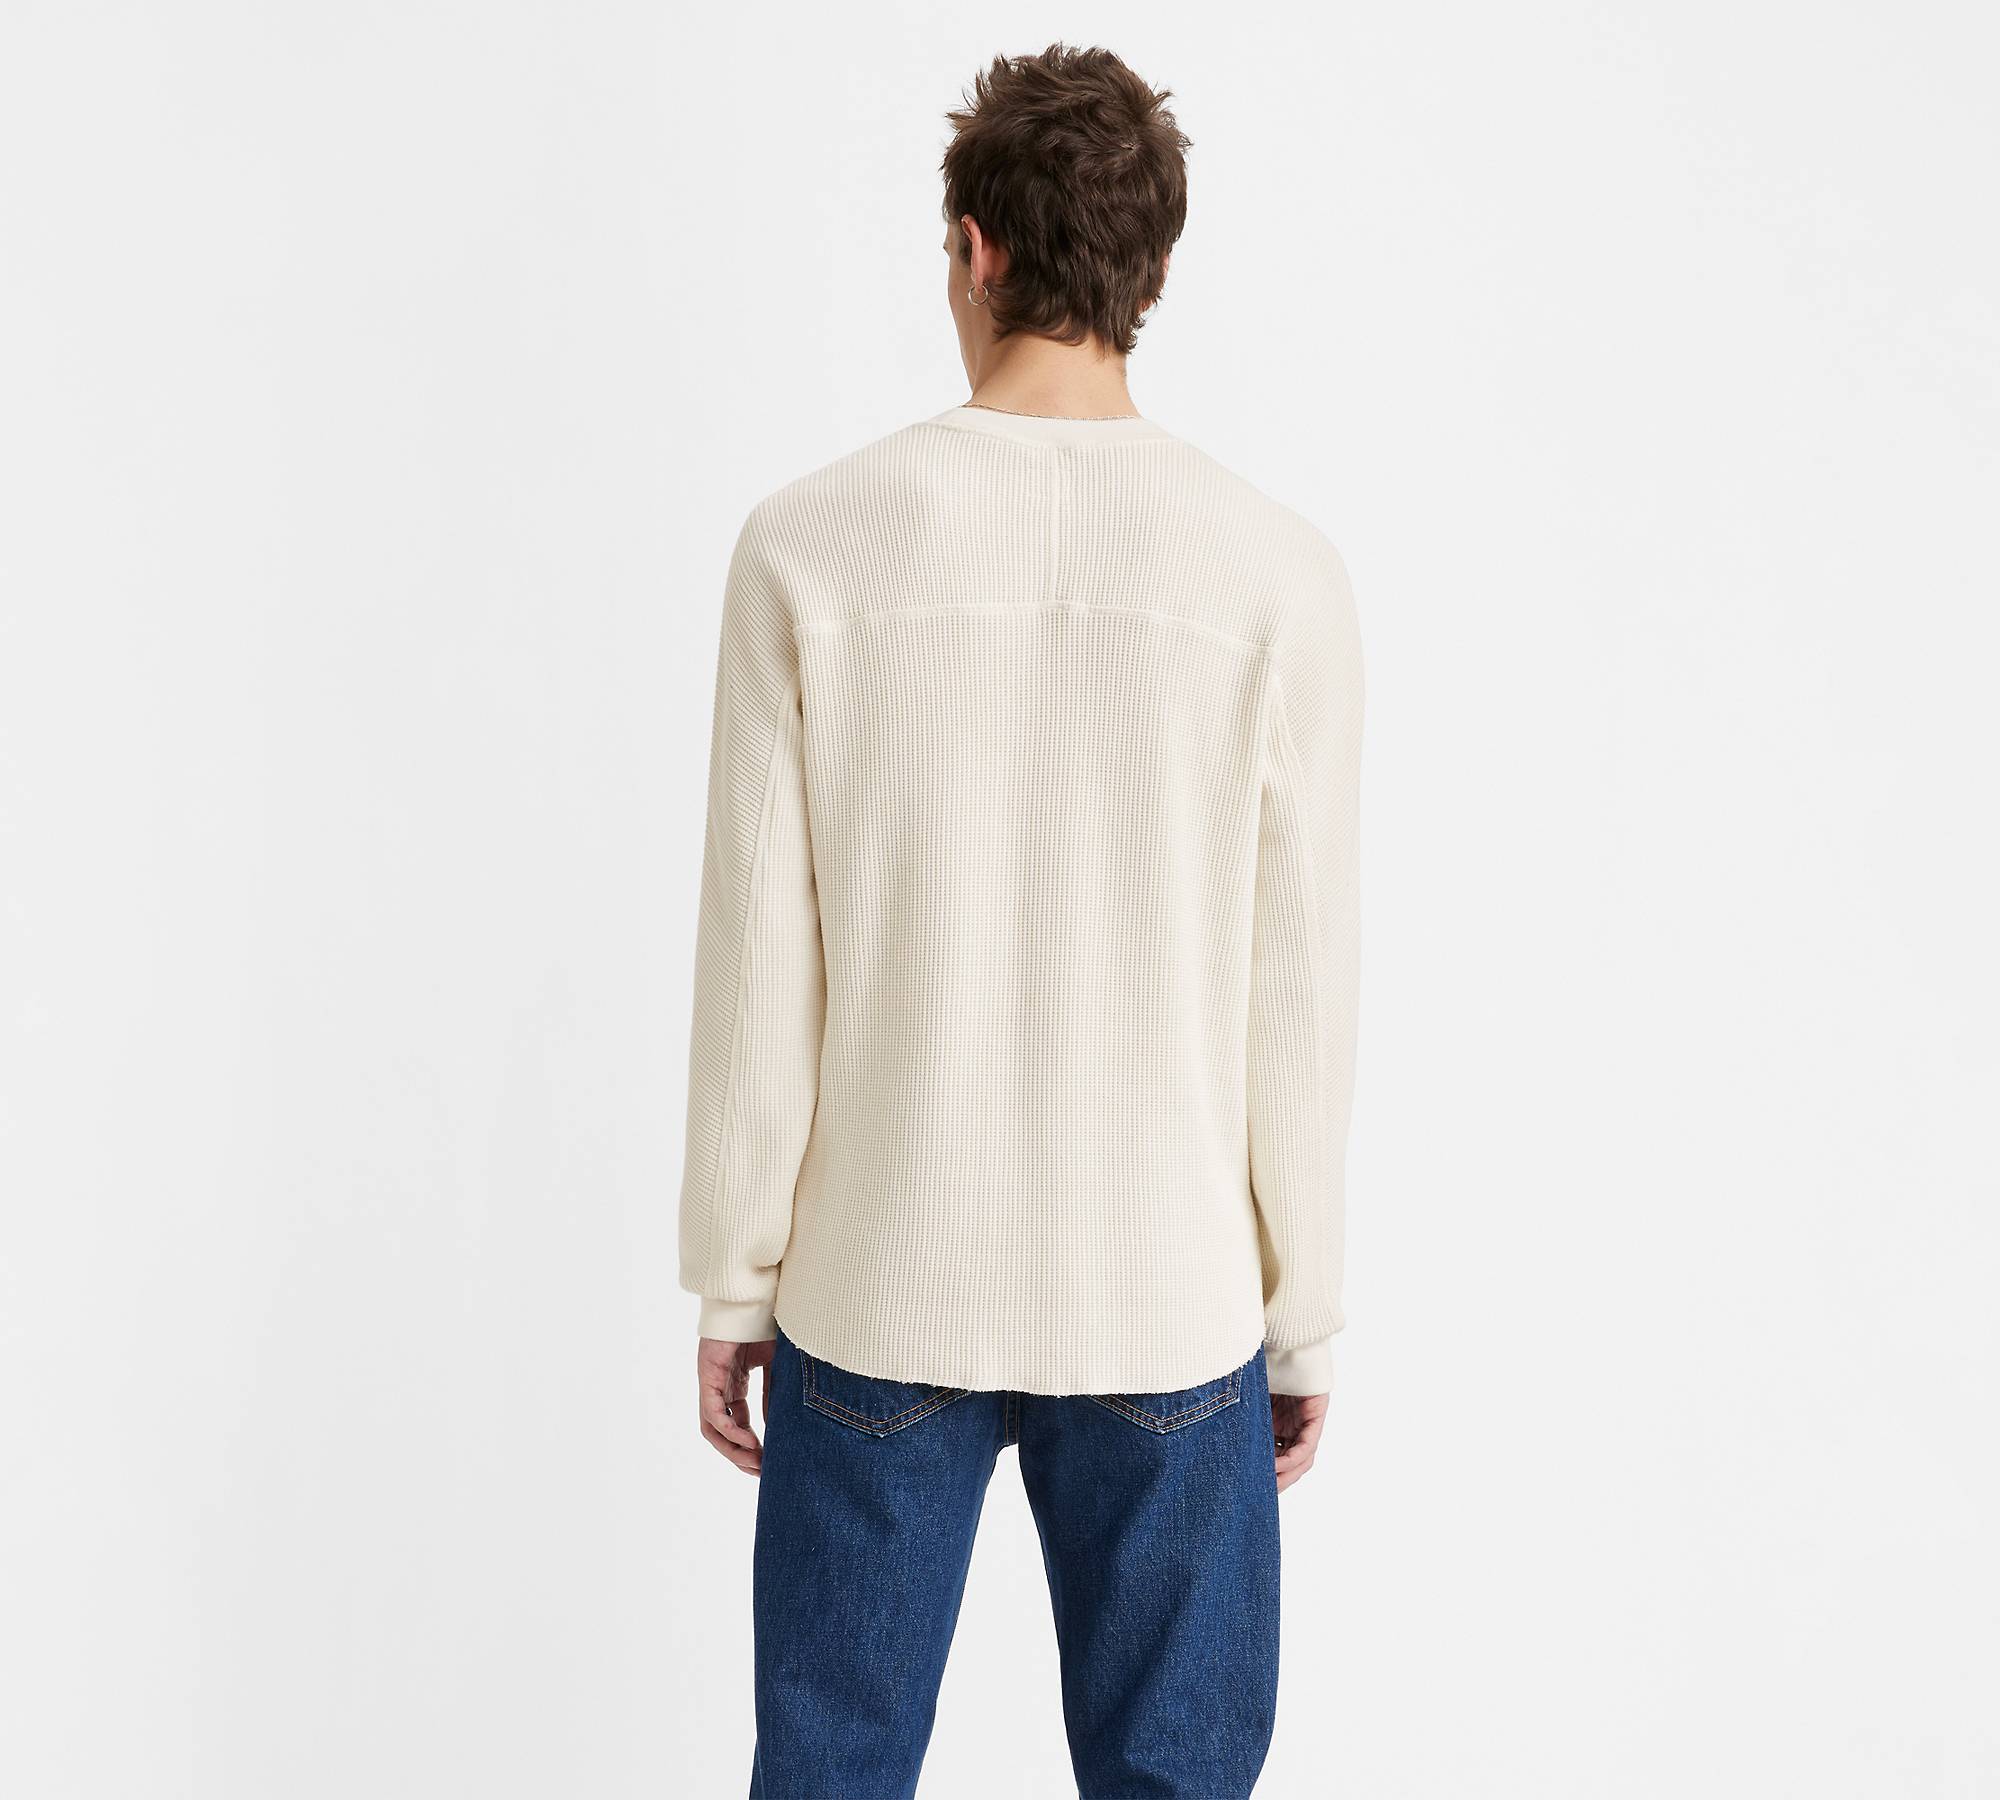 Long Sleeve Relaxed Fit Thermal Shirt - White | Levi's® US